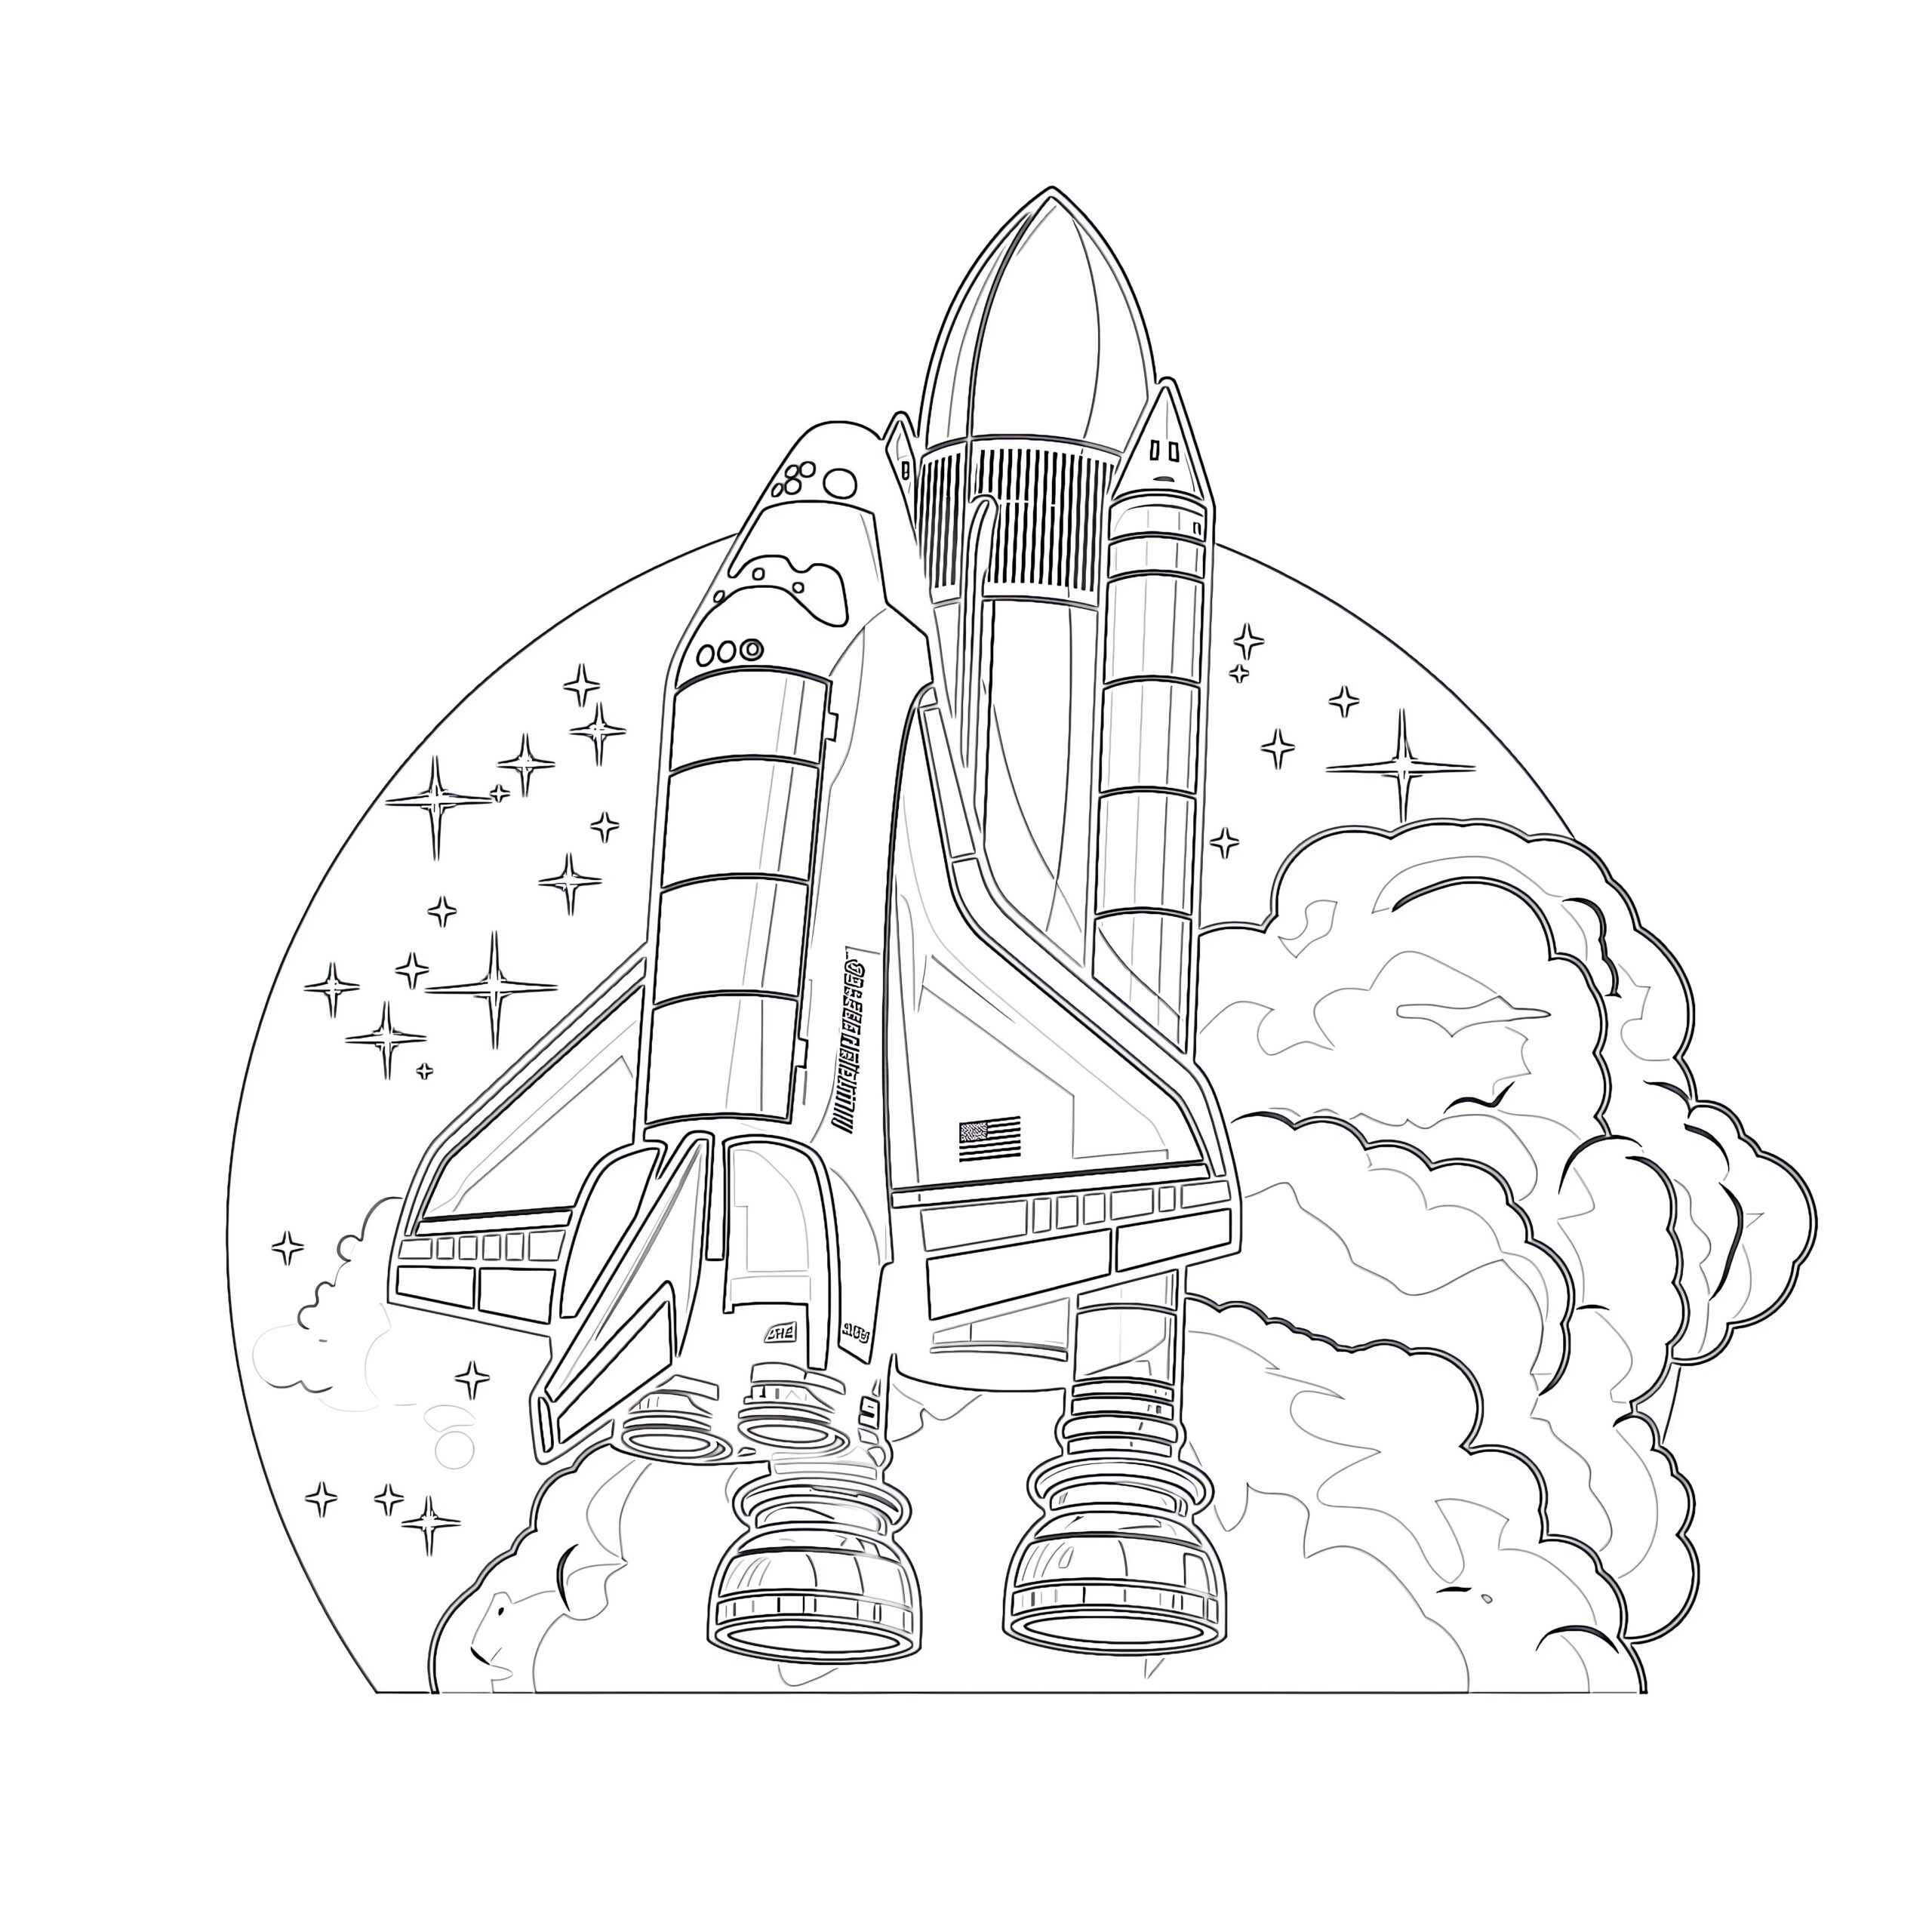 Printable Space Shuttle Coloring Page ...